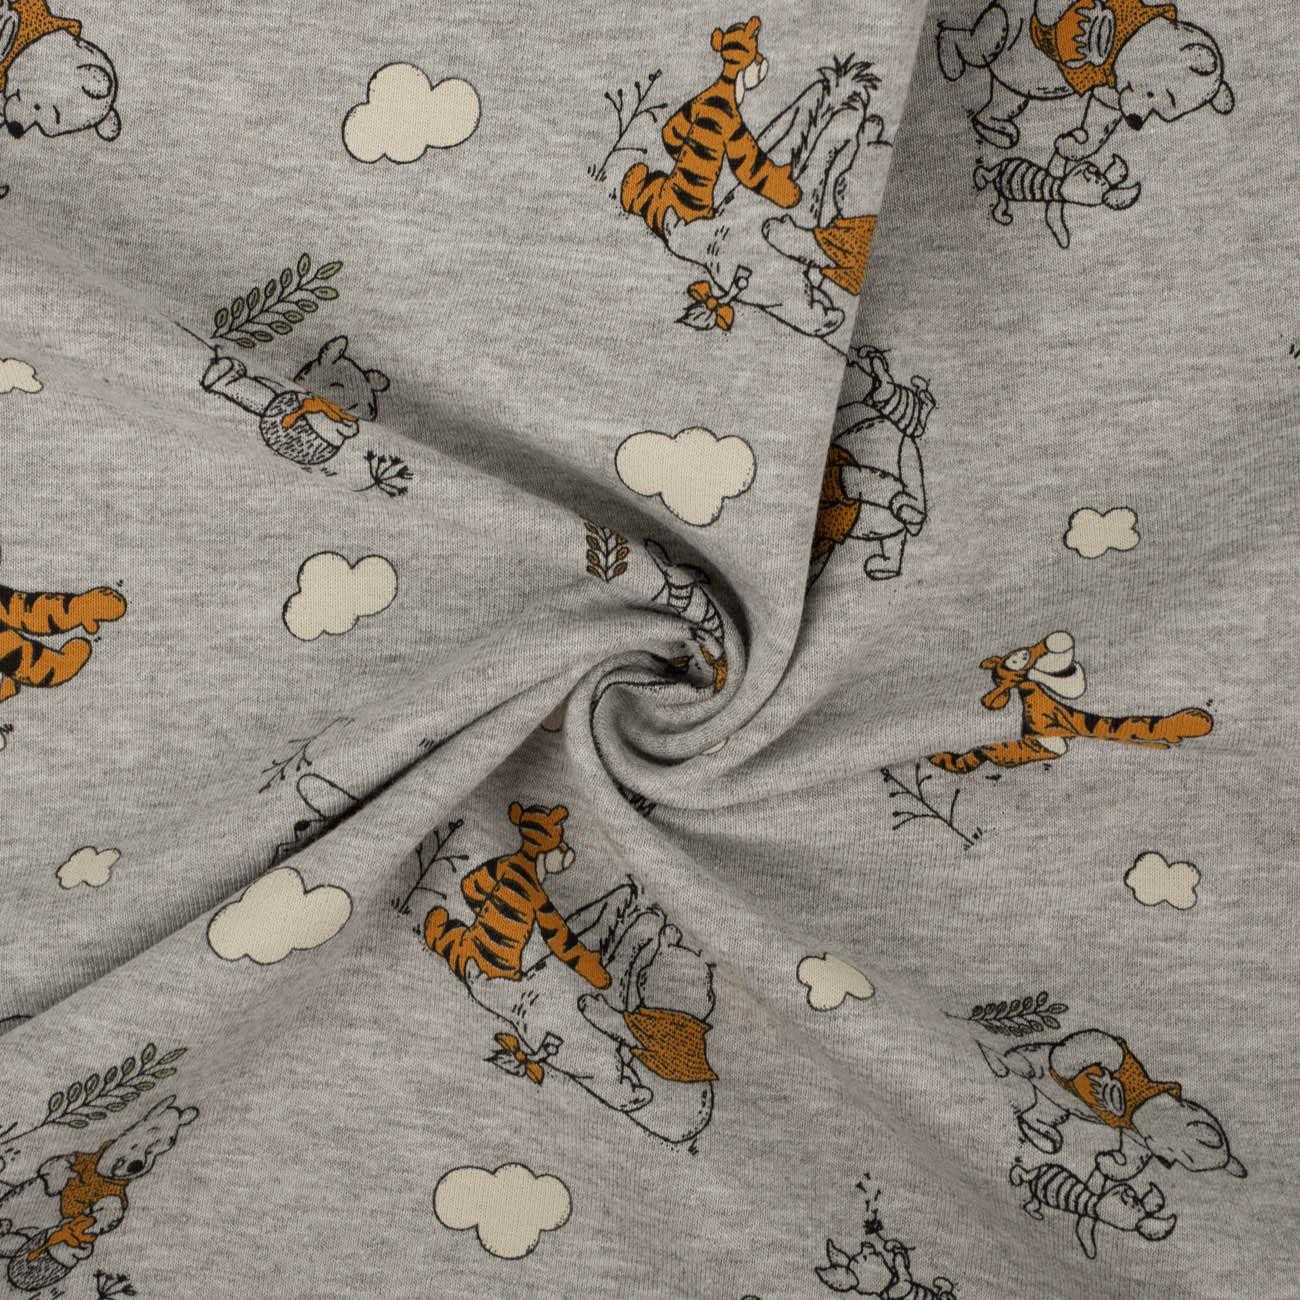 WINNIE THE POOH AND FRIENDS - brushed knitwear with elastane